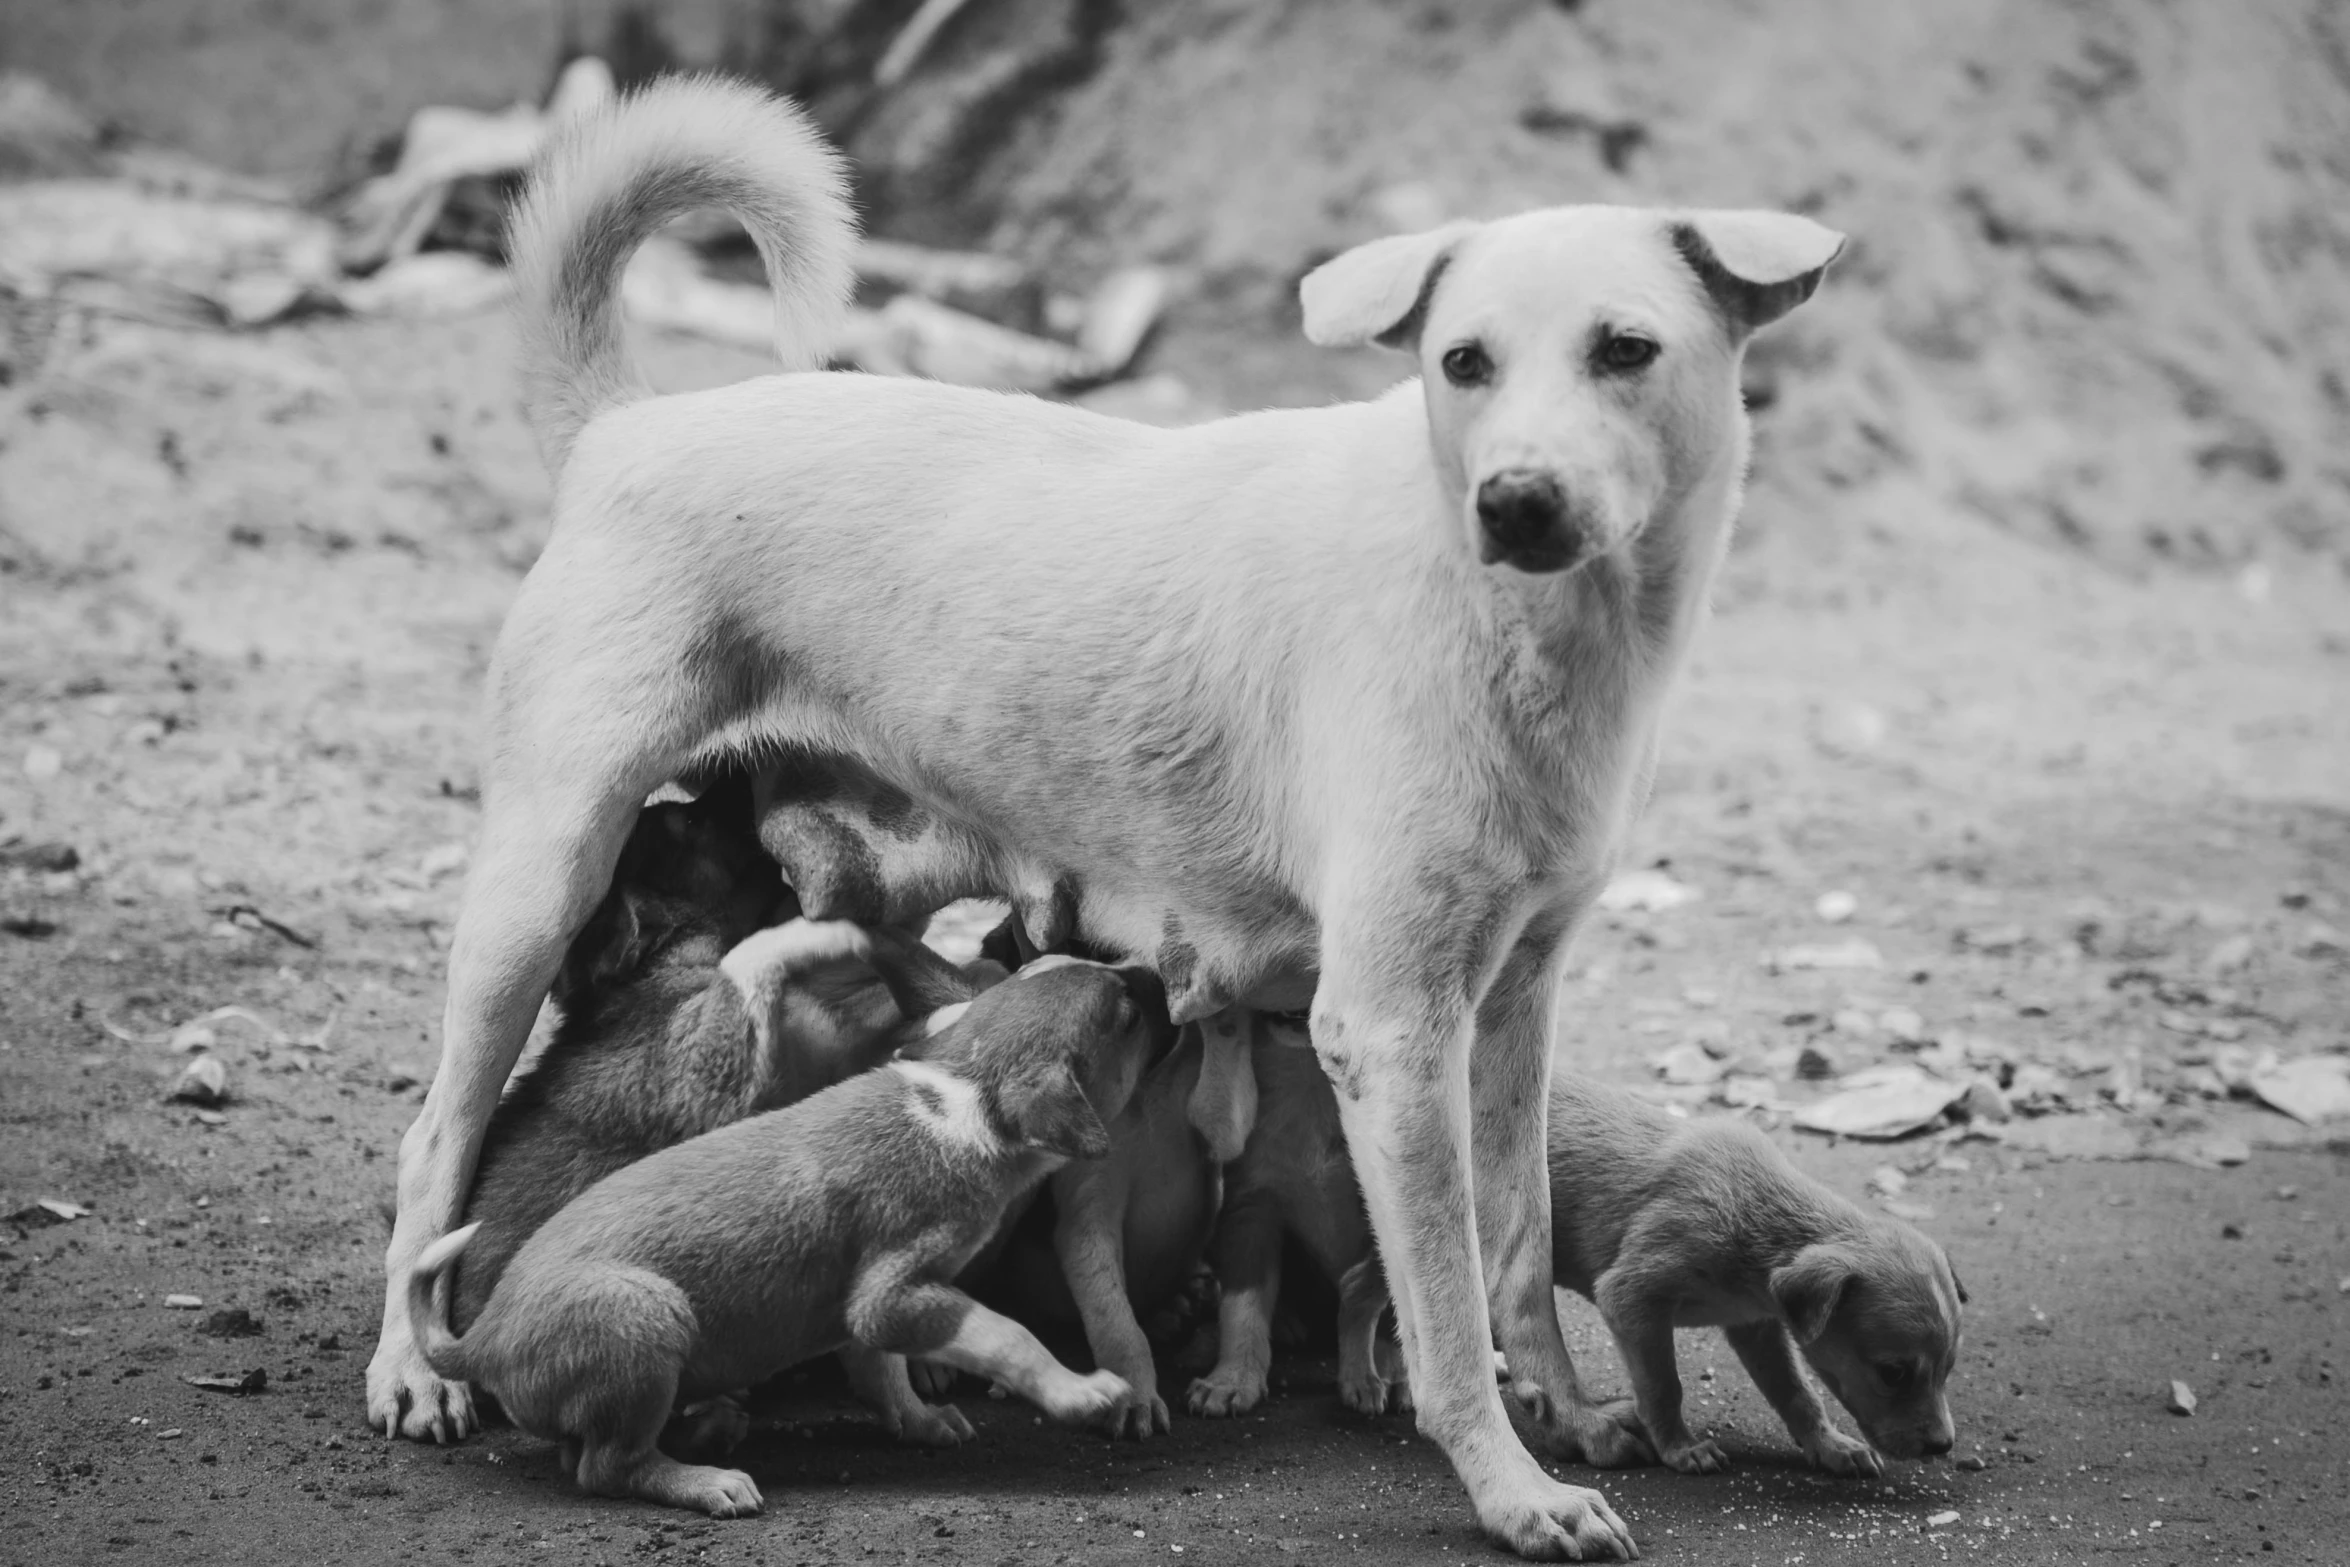 this dog is standing over the baby puppies